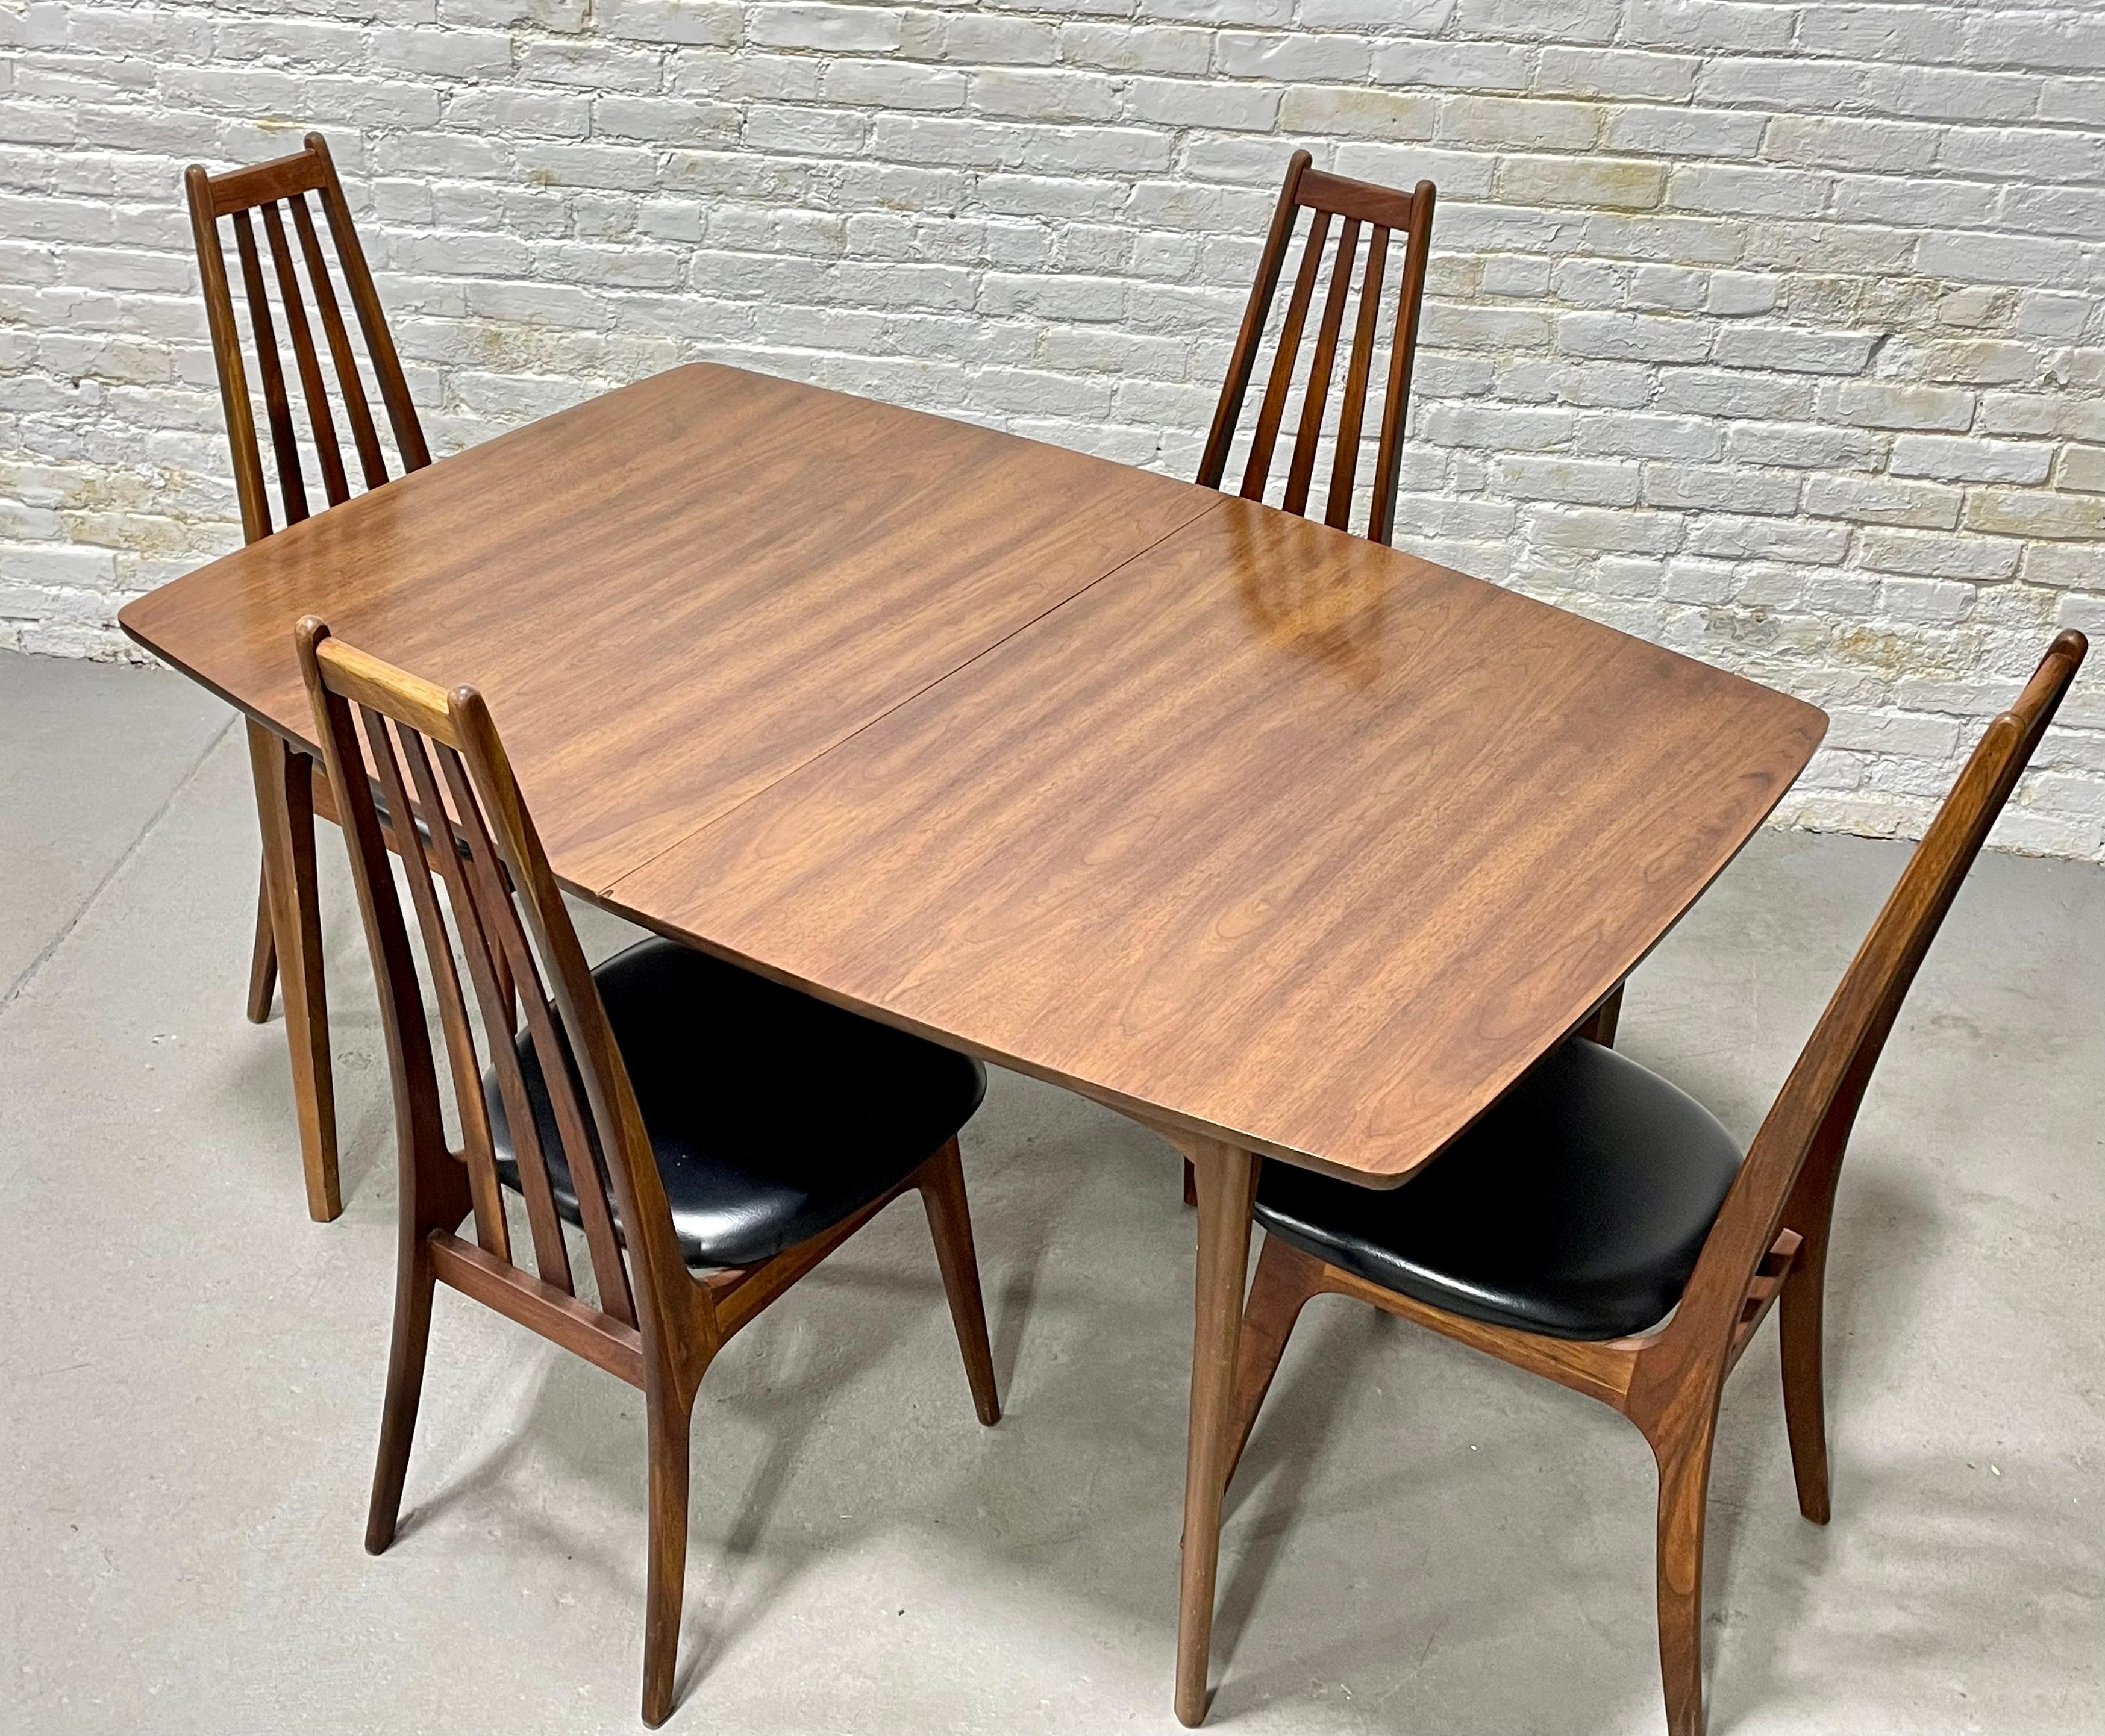 Mid-Century Modern WALNUT DINING TABLE, c. 1960s. Lovely Size to seat 6 guests comfortably. The table itself is solidly built from walnut wood and sturdy for decades of use. The table expands at the center but there are no leaves included. Lovely